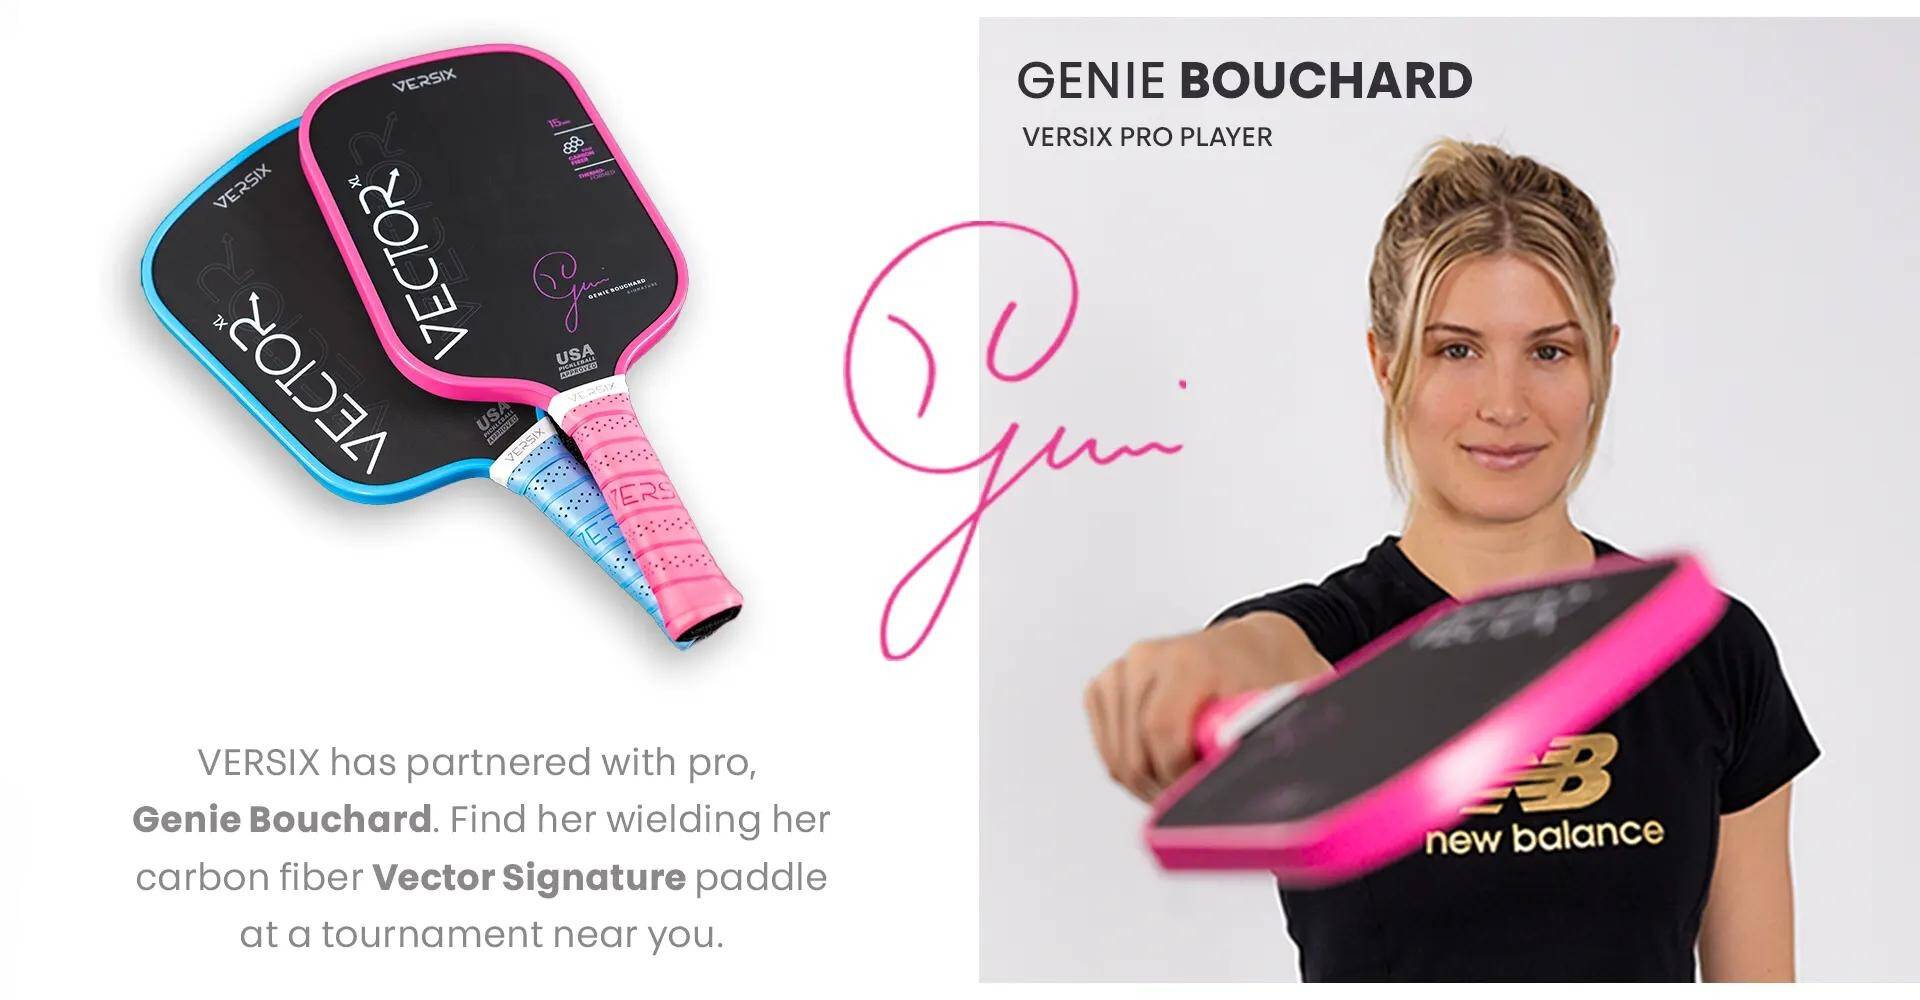 Pro pickleball player Genie Bouchard partnered with Verisix pickleball to bring out her carbon fiber signature pickleball paddle